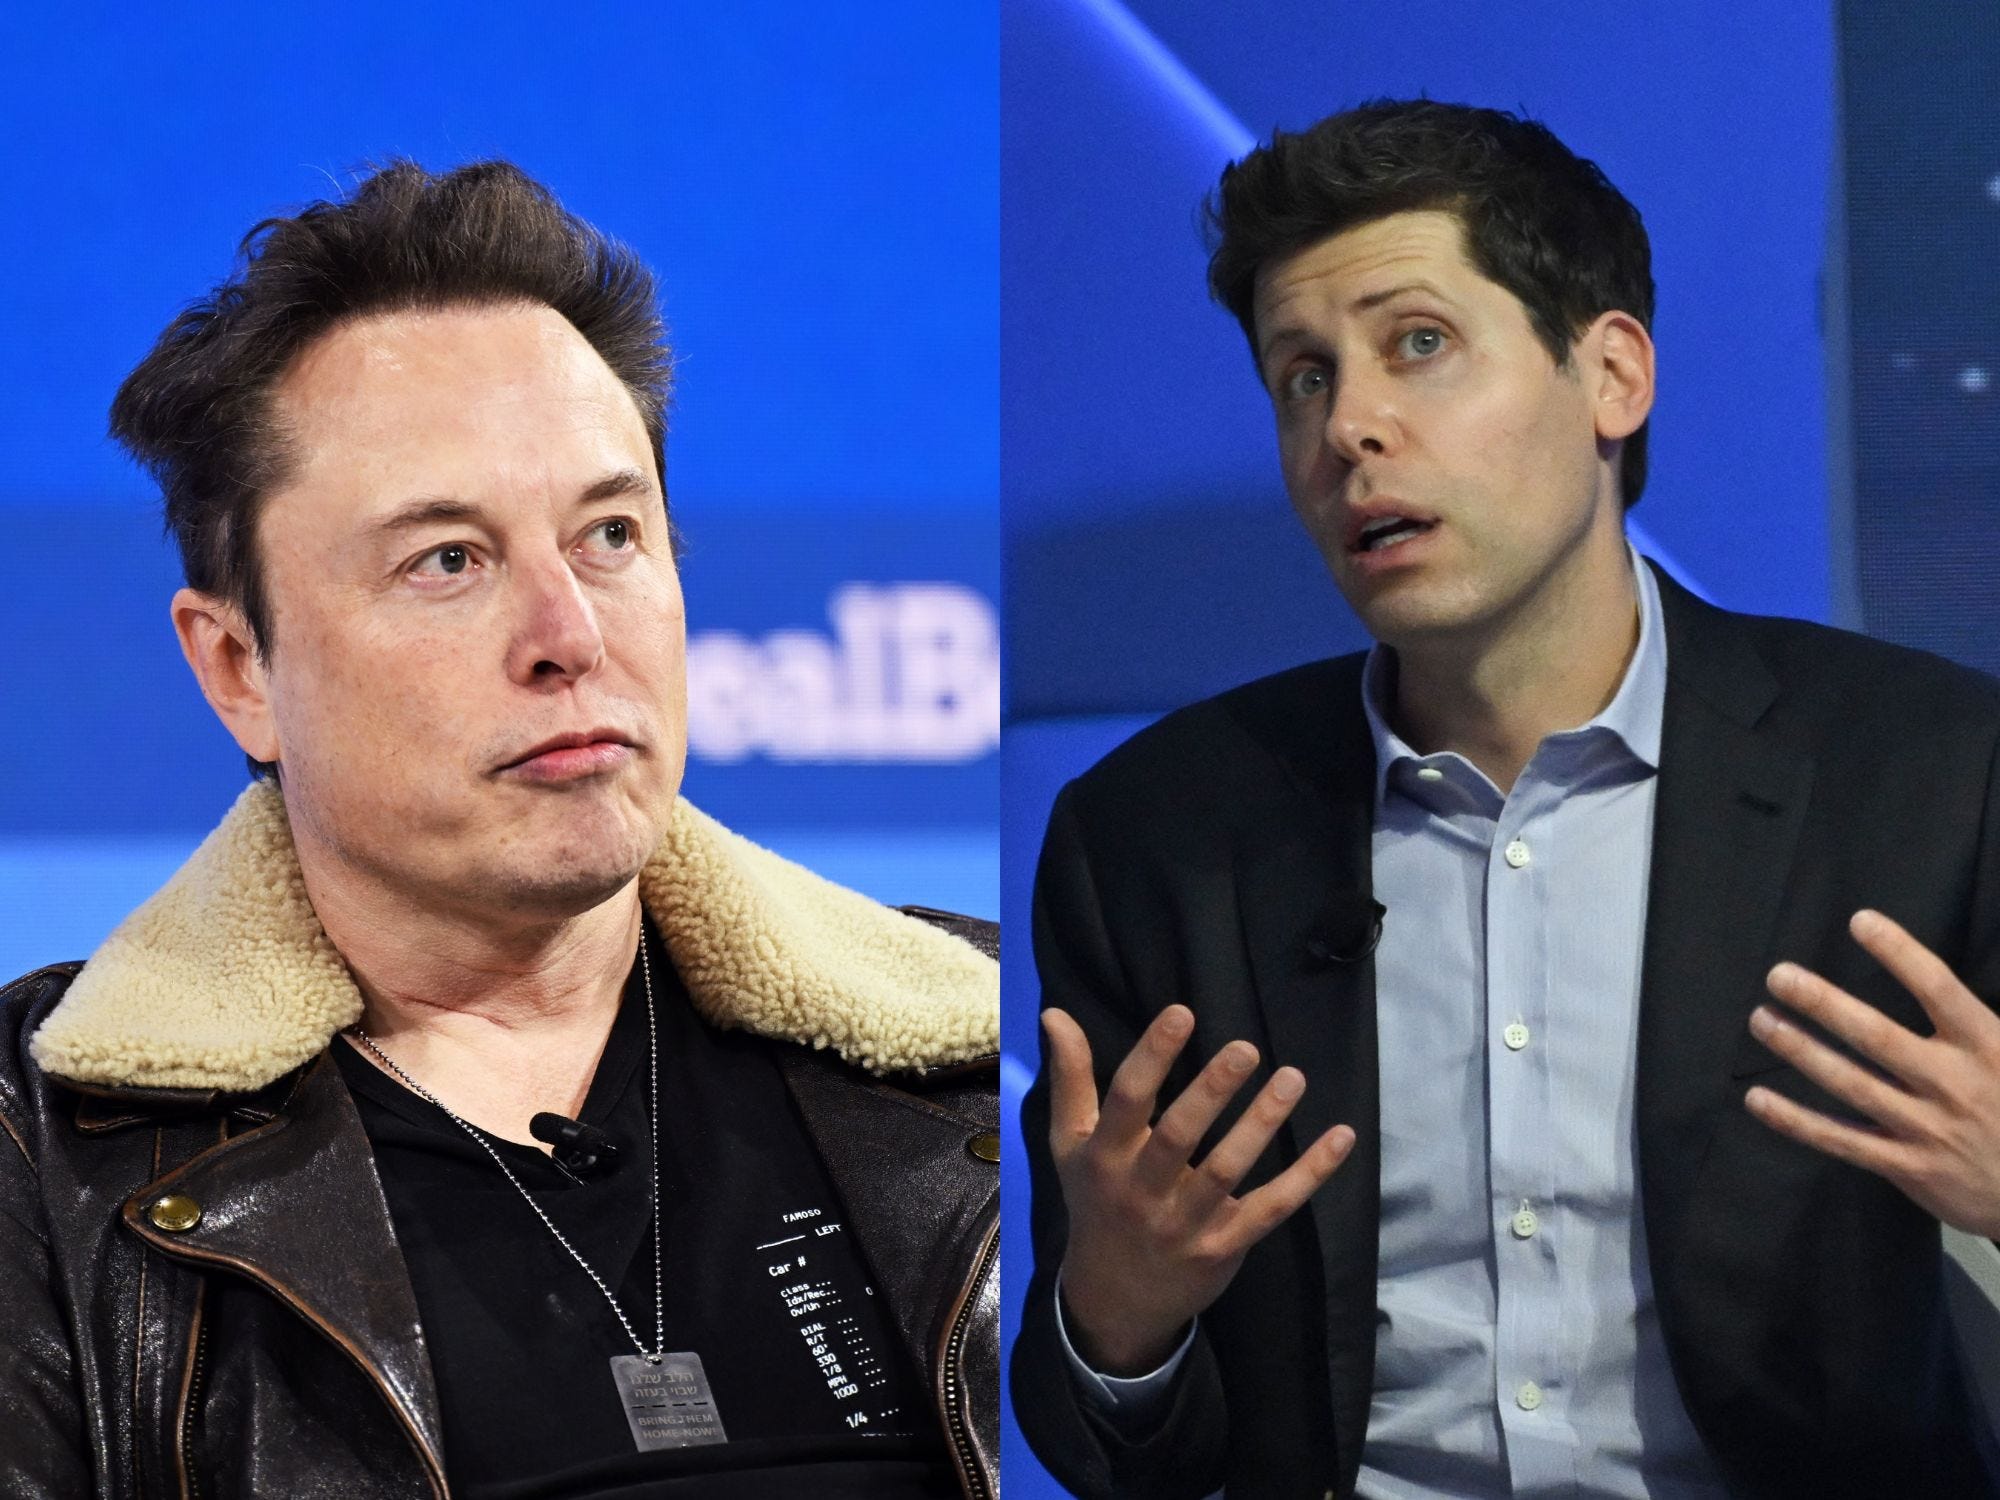 Elon Musk and Sam Altman founded OpenAI together, but are now at odds in a lawsuit. Here's the history of their working relationship and feud.